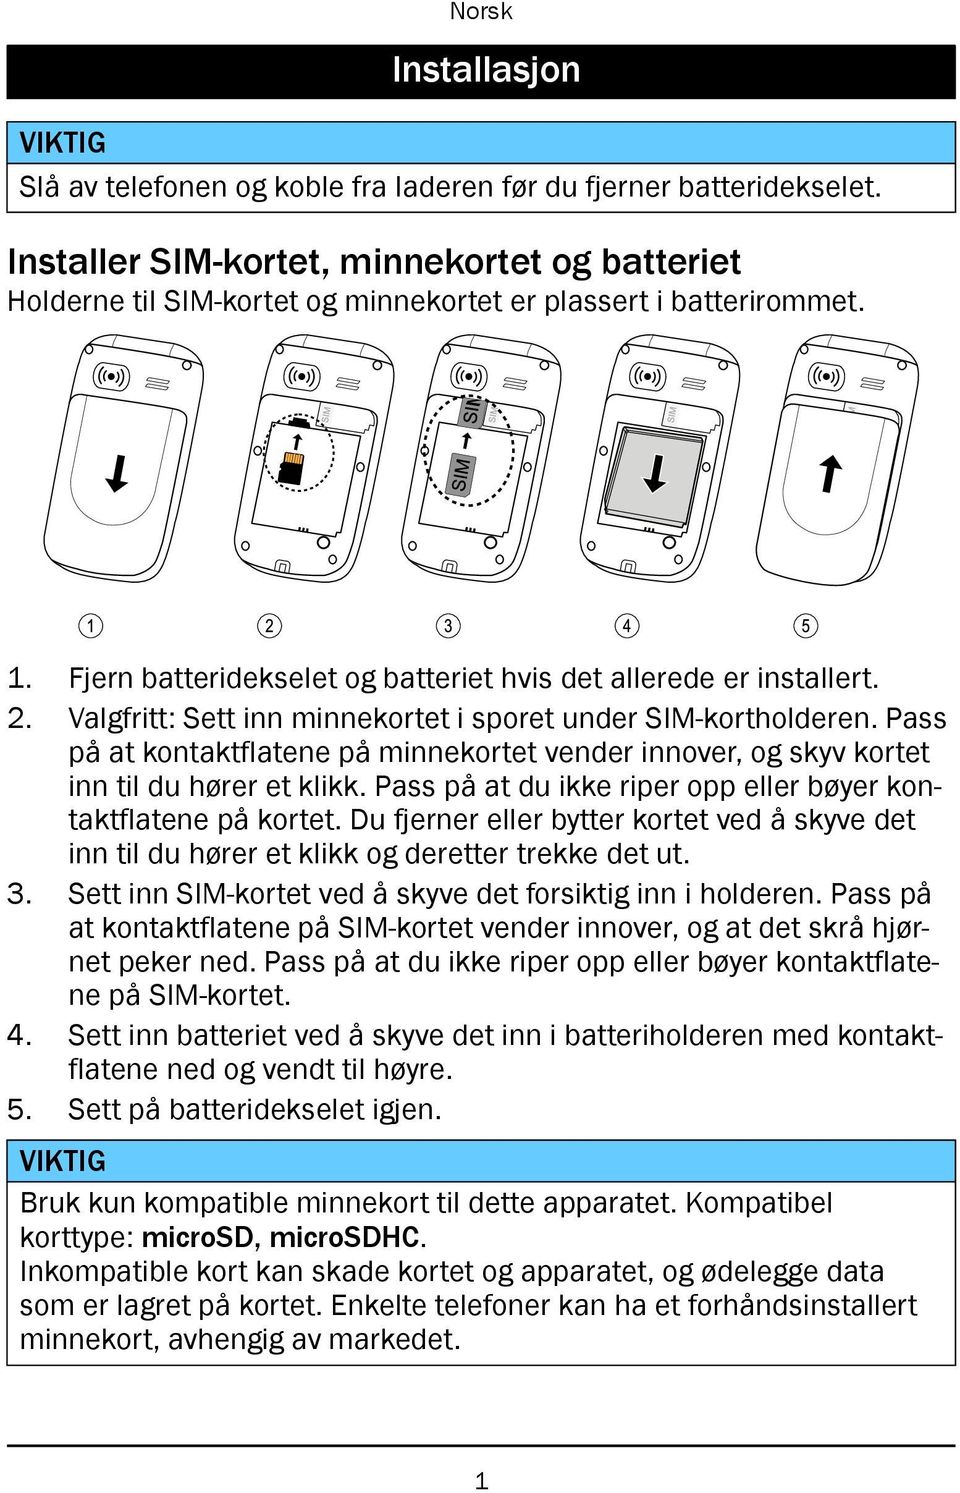 Doro PhoneEasy 624. Norsk - PDF Free Download